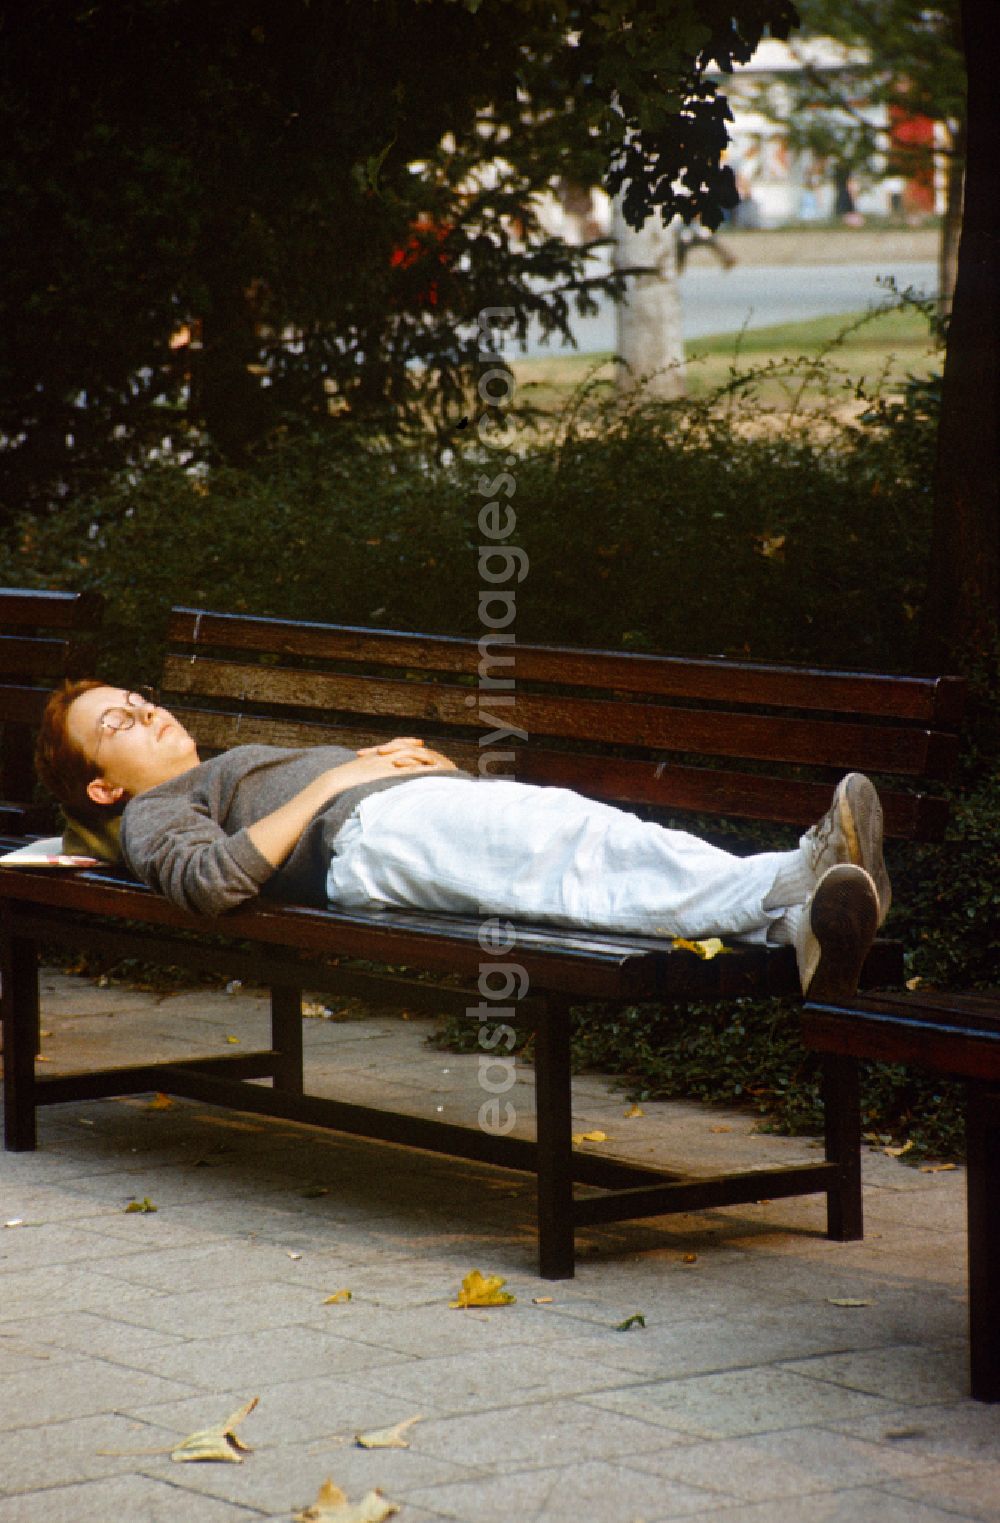 GDR image archive: Berlin - Woman sleeping on a park bench in Berlin-Mitte in the area of the former GDR, German Democratic Republic